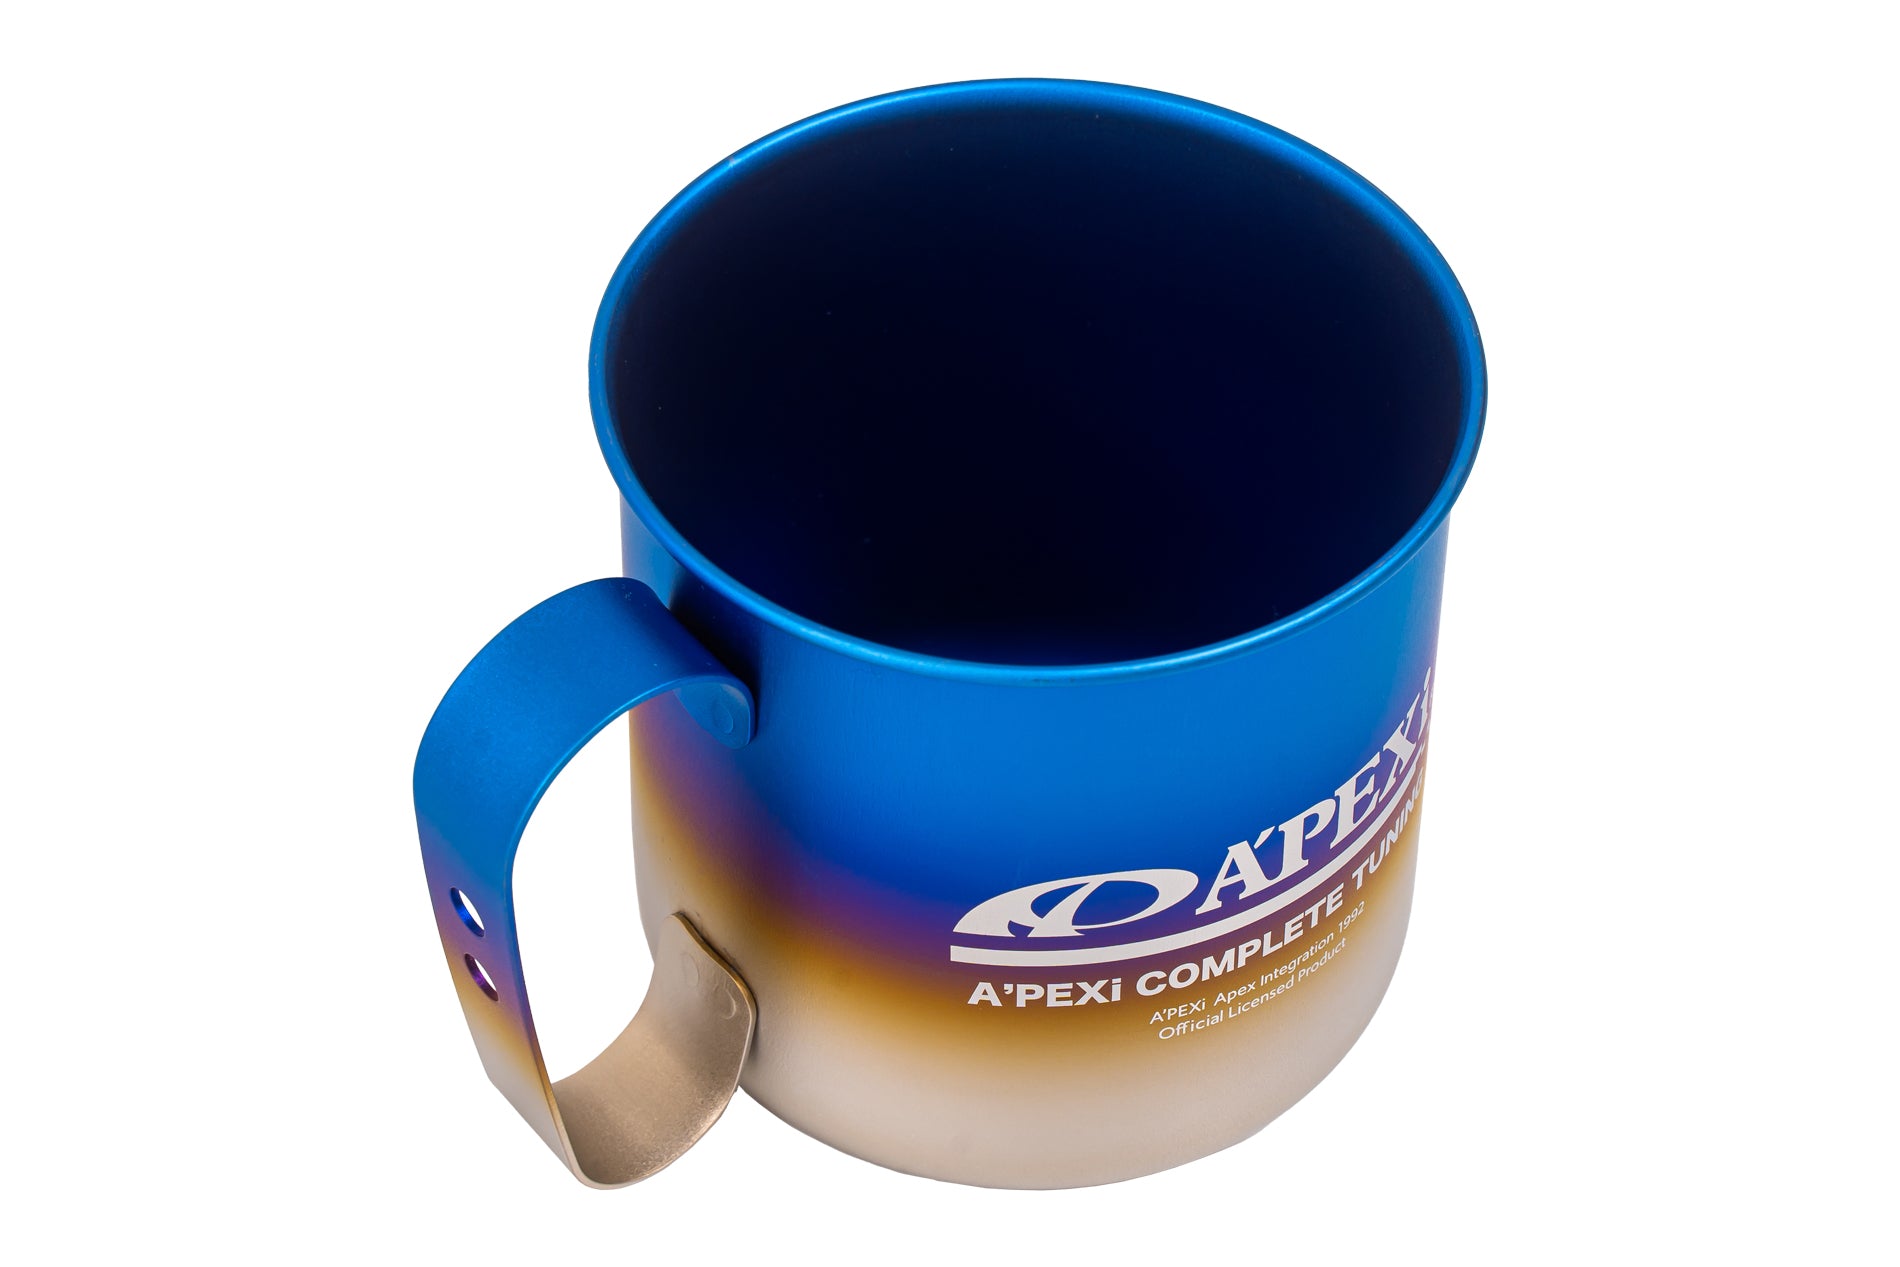 A'PEXi - LIMITED EDITION - Titanium Mug Cup ** SOLD OUT **